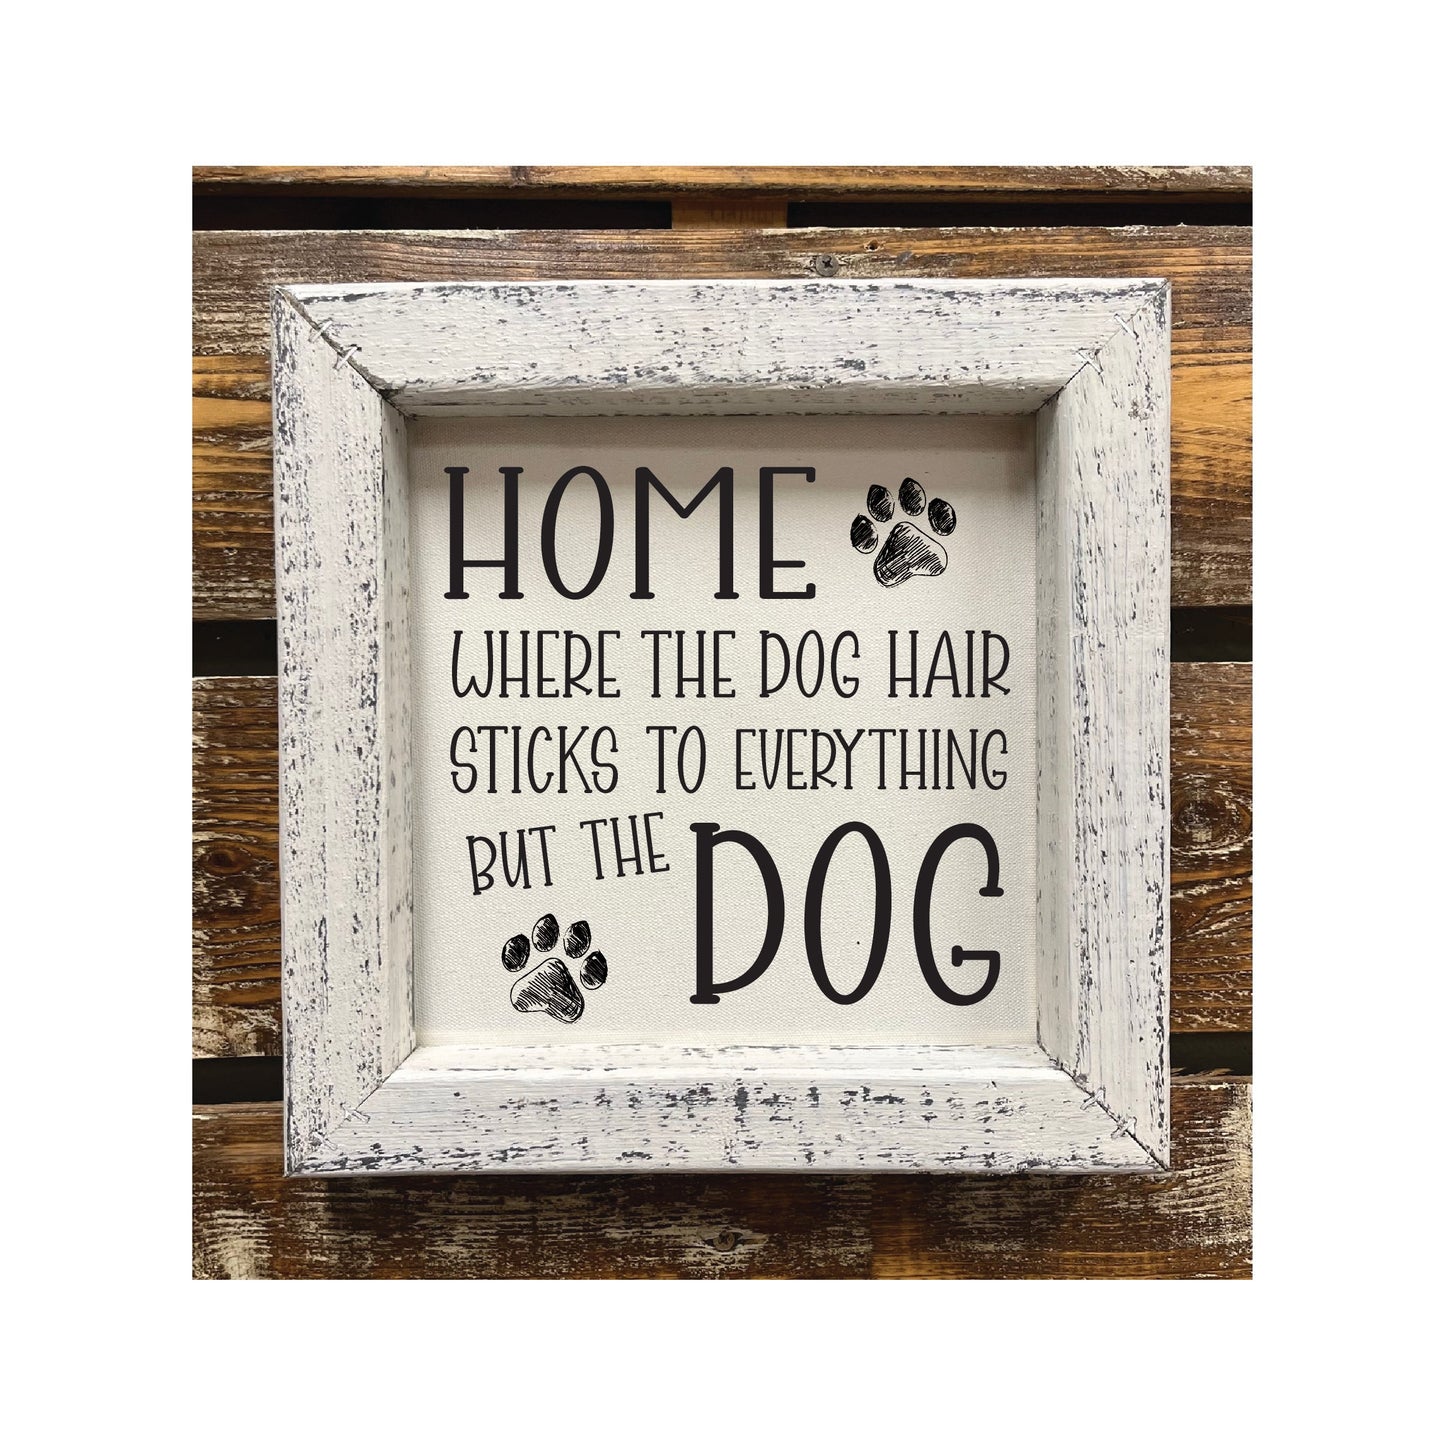 Home Is Where The Dog Hair Sticks to Everything...